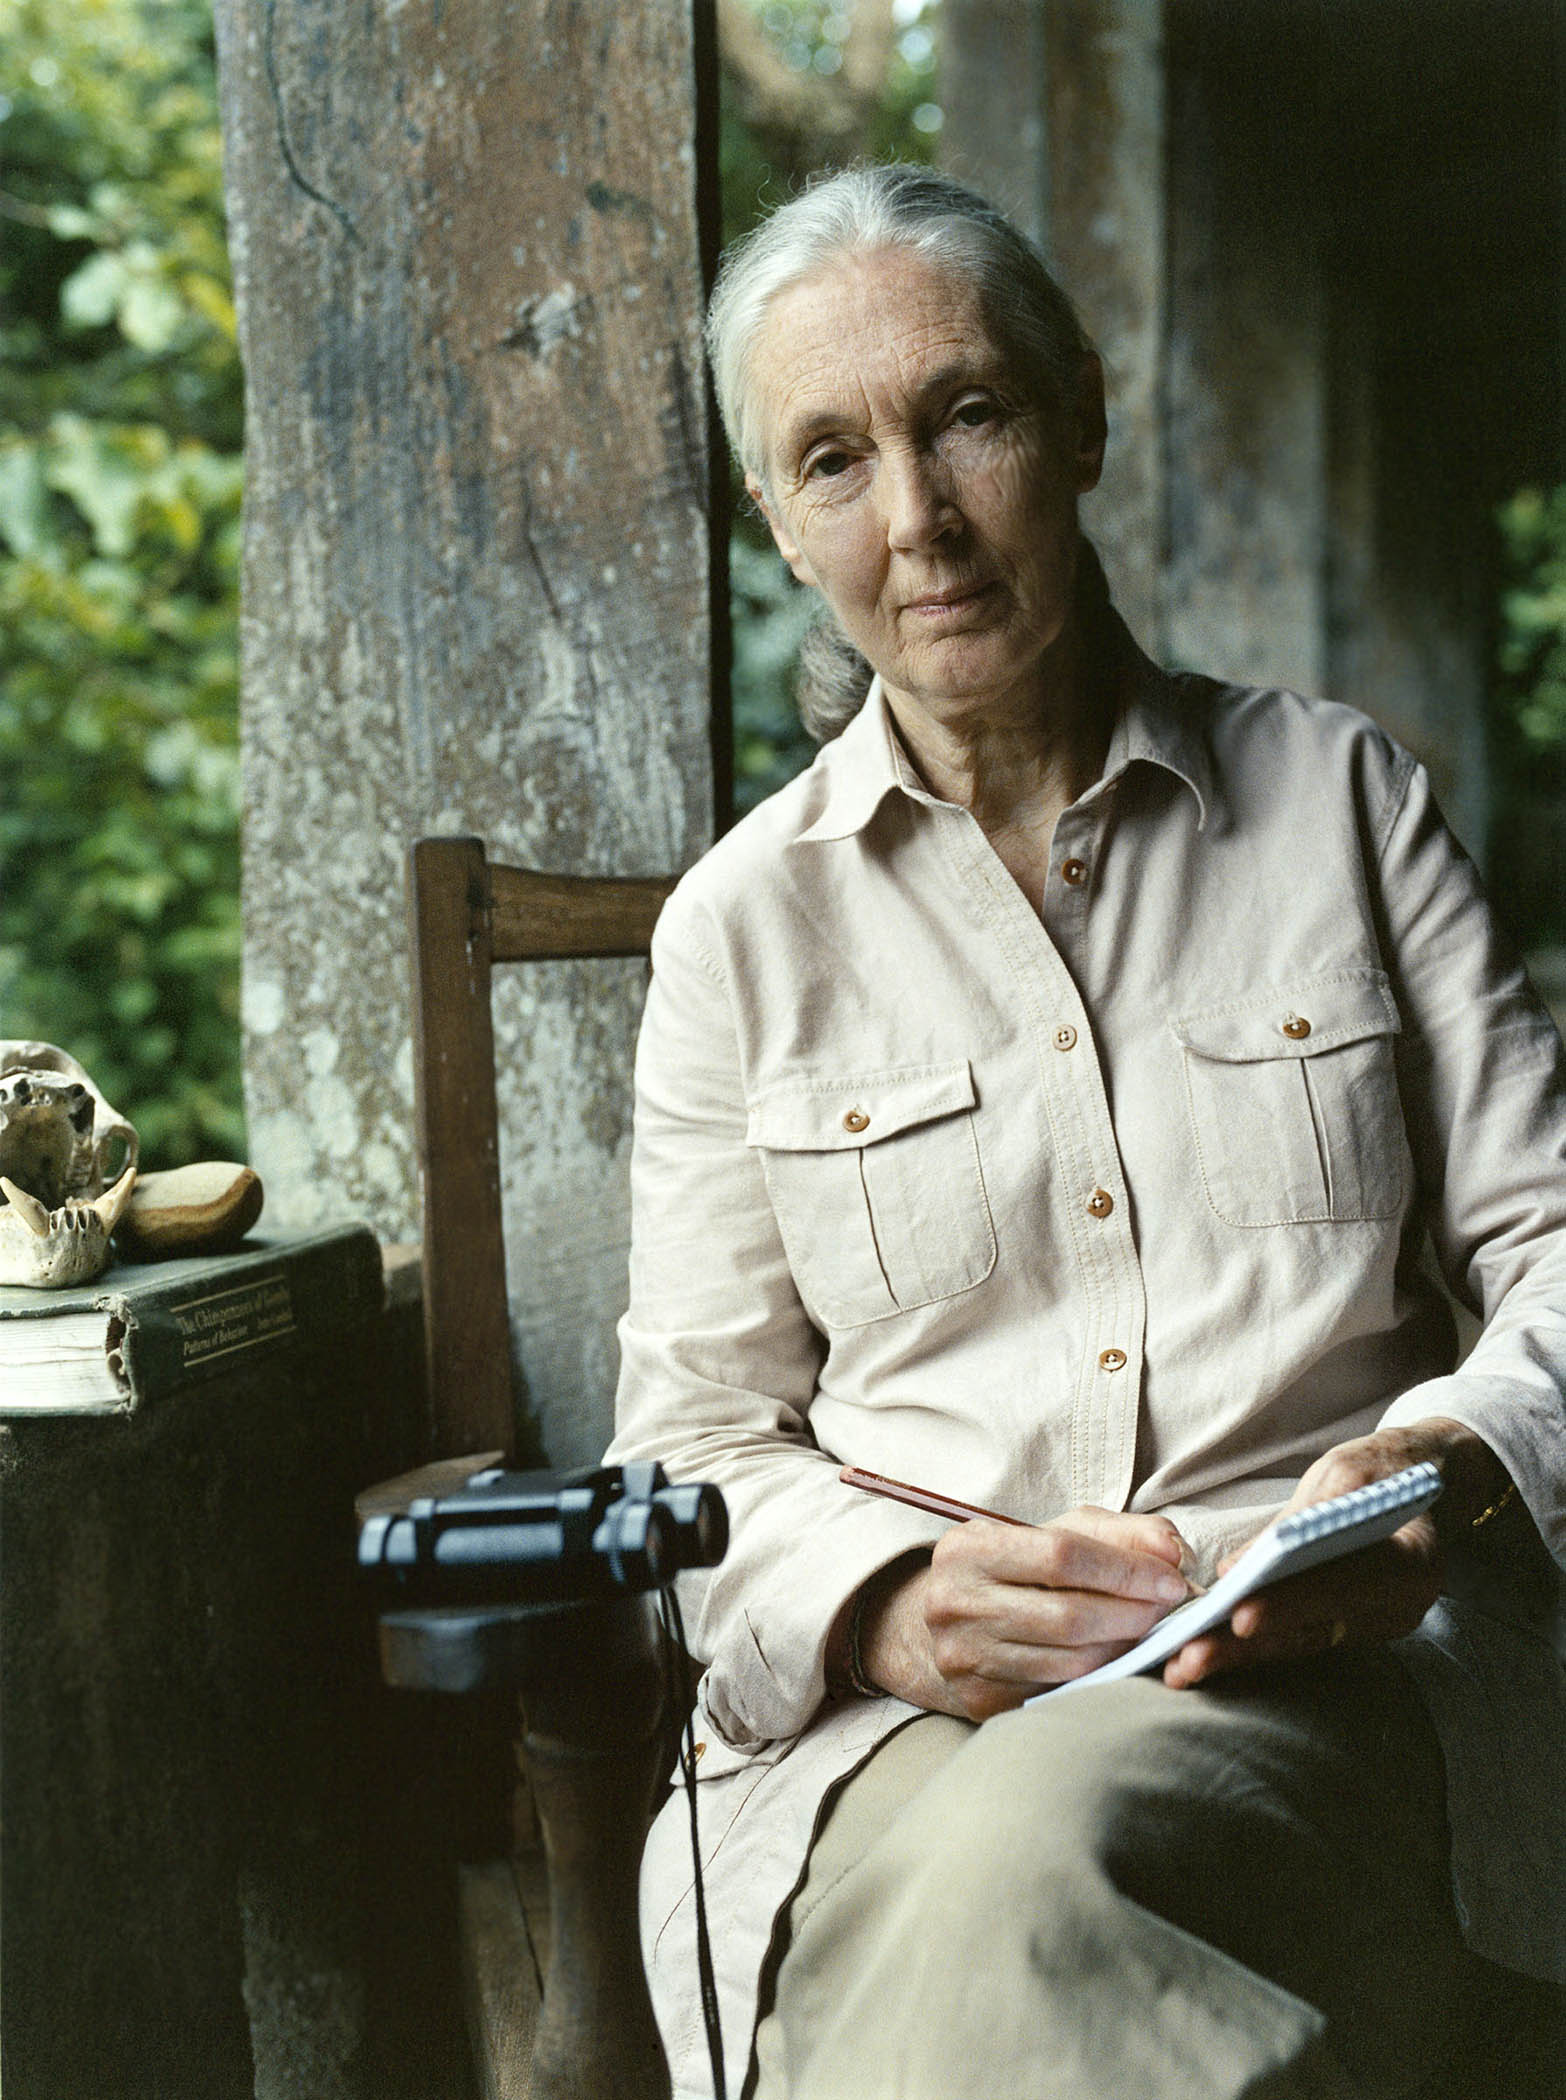 Dr. Jane Goodall in Gombe National Park, Tanzania GANT clothing campaign